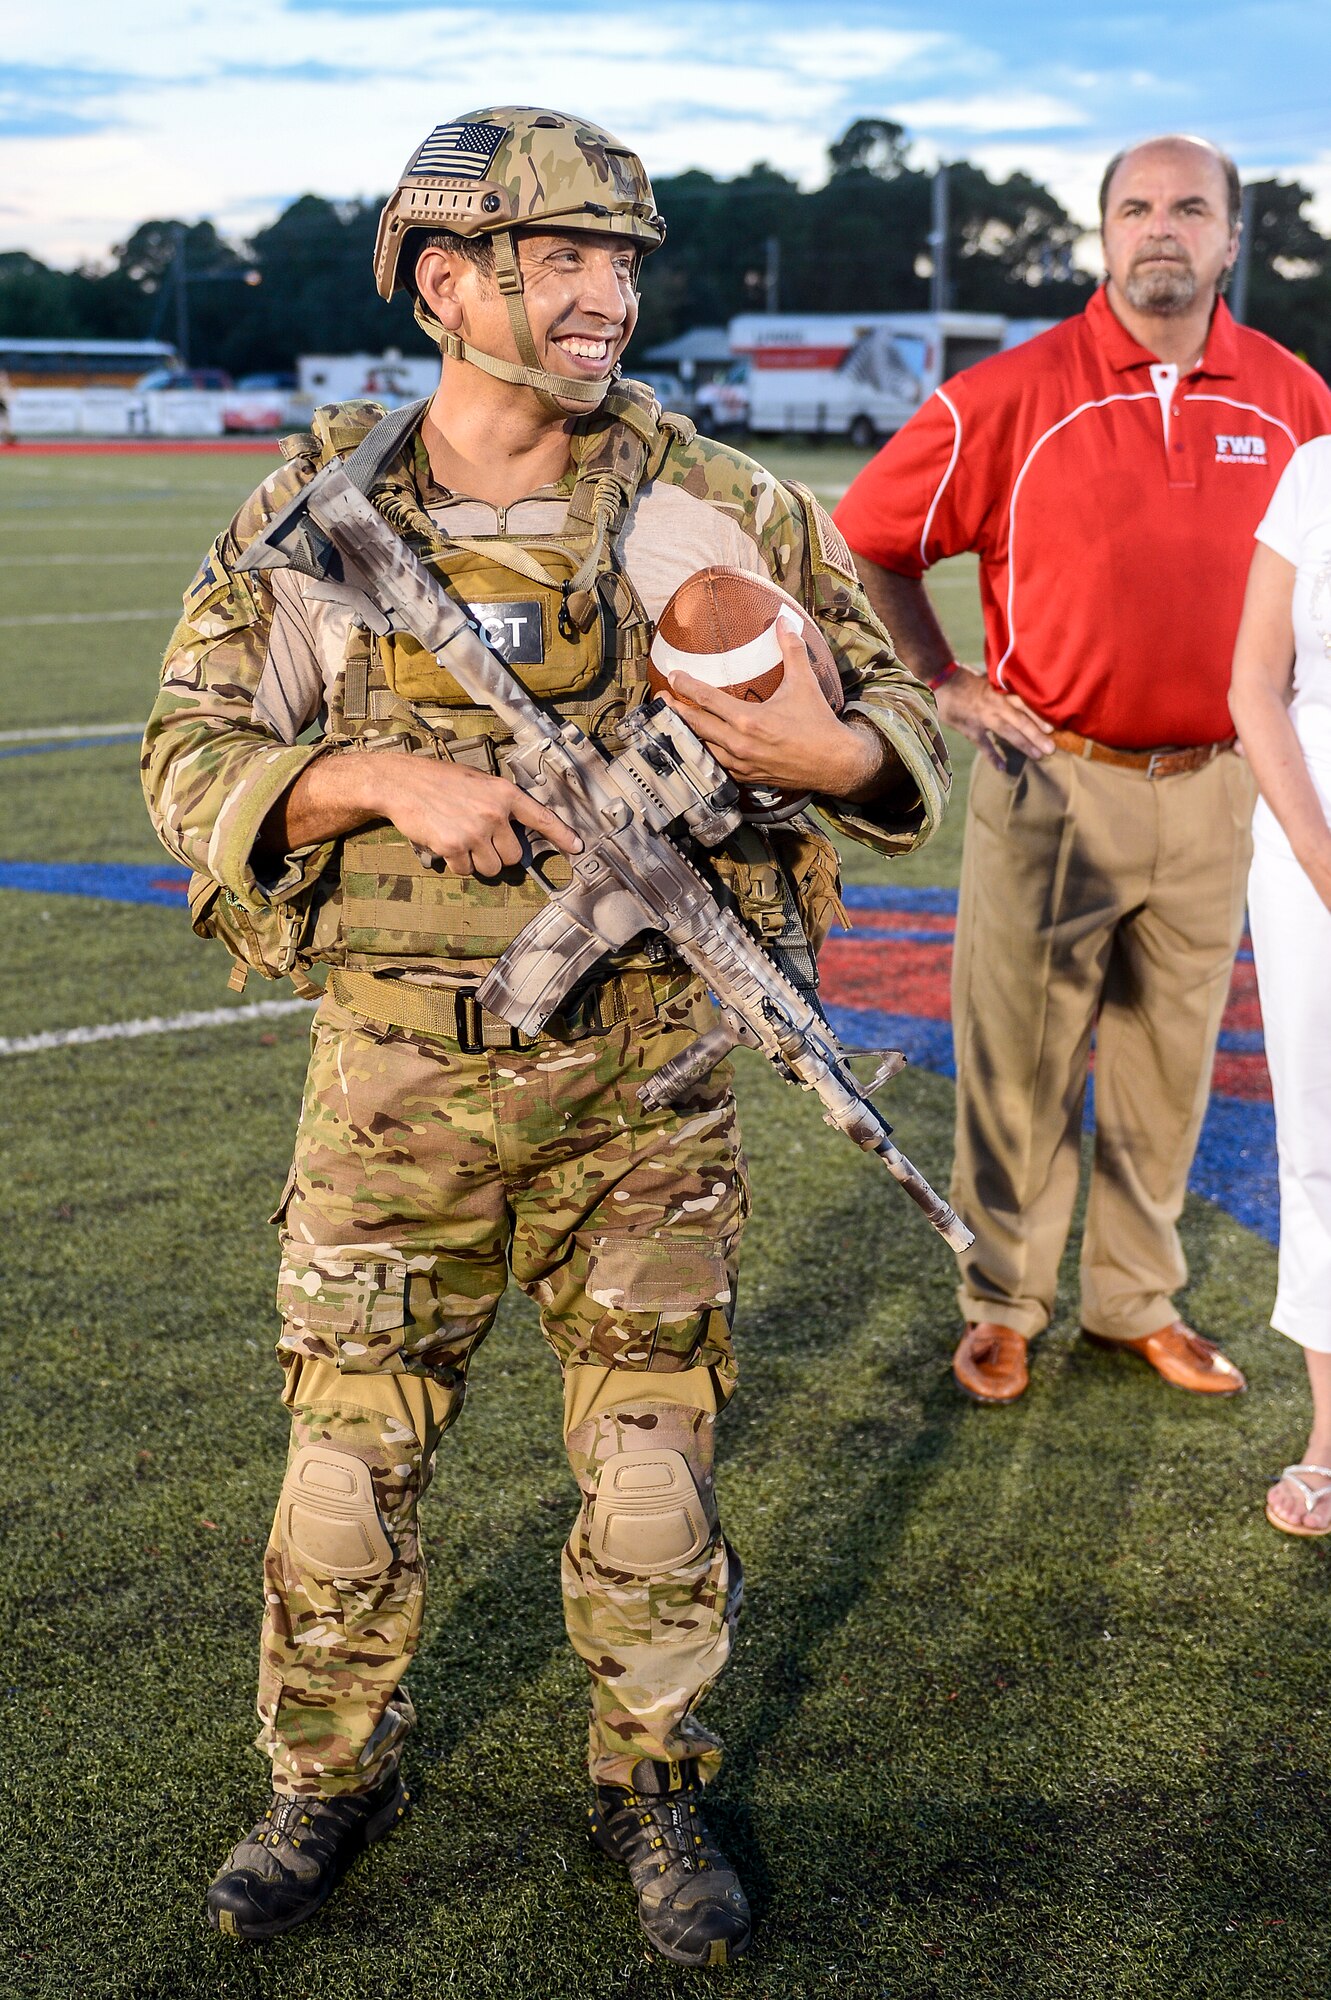 Tech. Sgt. Ismael Villegas, Special Tactics Training Squadron special tactics member, delivers the game football at Fort Walton Beach High School, Fort Walton Beach, Fla., Sept. 12, 2014. Fort Walton Beach High School hosted a military appreciation night, to pay tribute to the dedication of their local servicemen and women. . (U.S. Air Force photo/Airman 1st Class Jeff Parkinson)